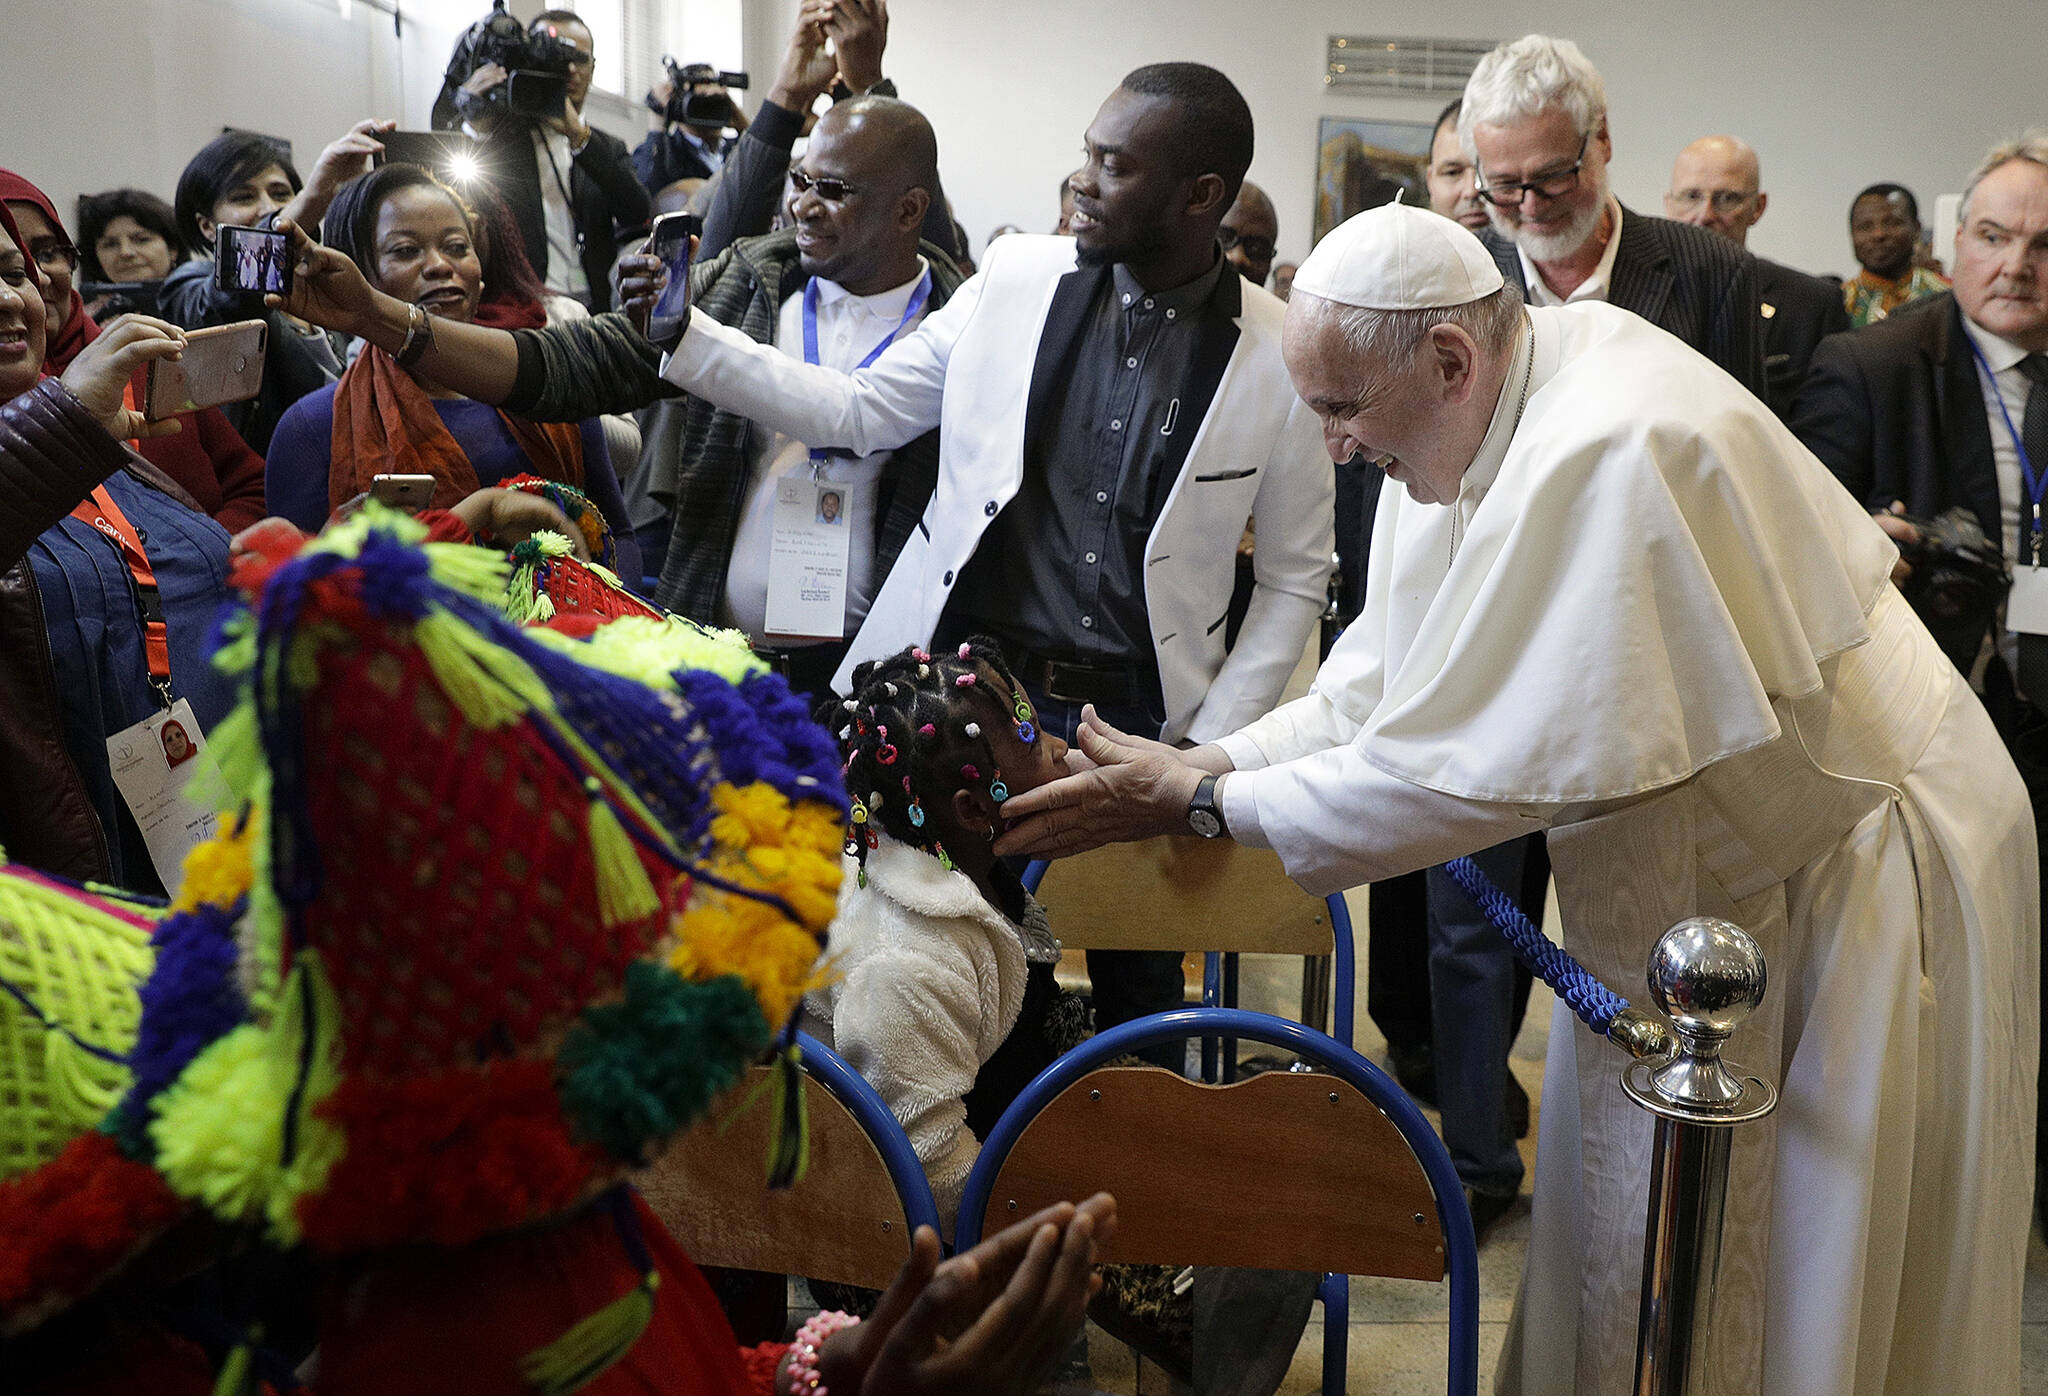 Pope Francis meets migrants at the diocesan Caritas center in Rabat, Morocco, Saturday, March 30, 2019. Francis’s weekend trip to Morocco aims to highlight the North African nation’s tradition of Christian-Muslim ties while also letting him show solidarity with migrants at Europe’s door and tend to a tiny Catholic flock on the peripheries. (AP Photo/Gregorio Borgia)